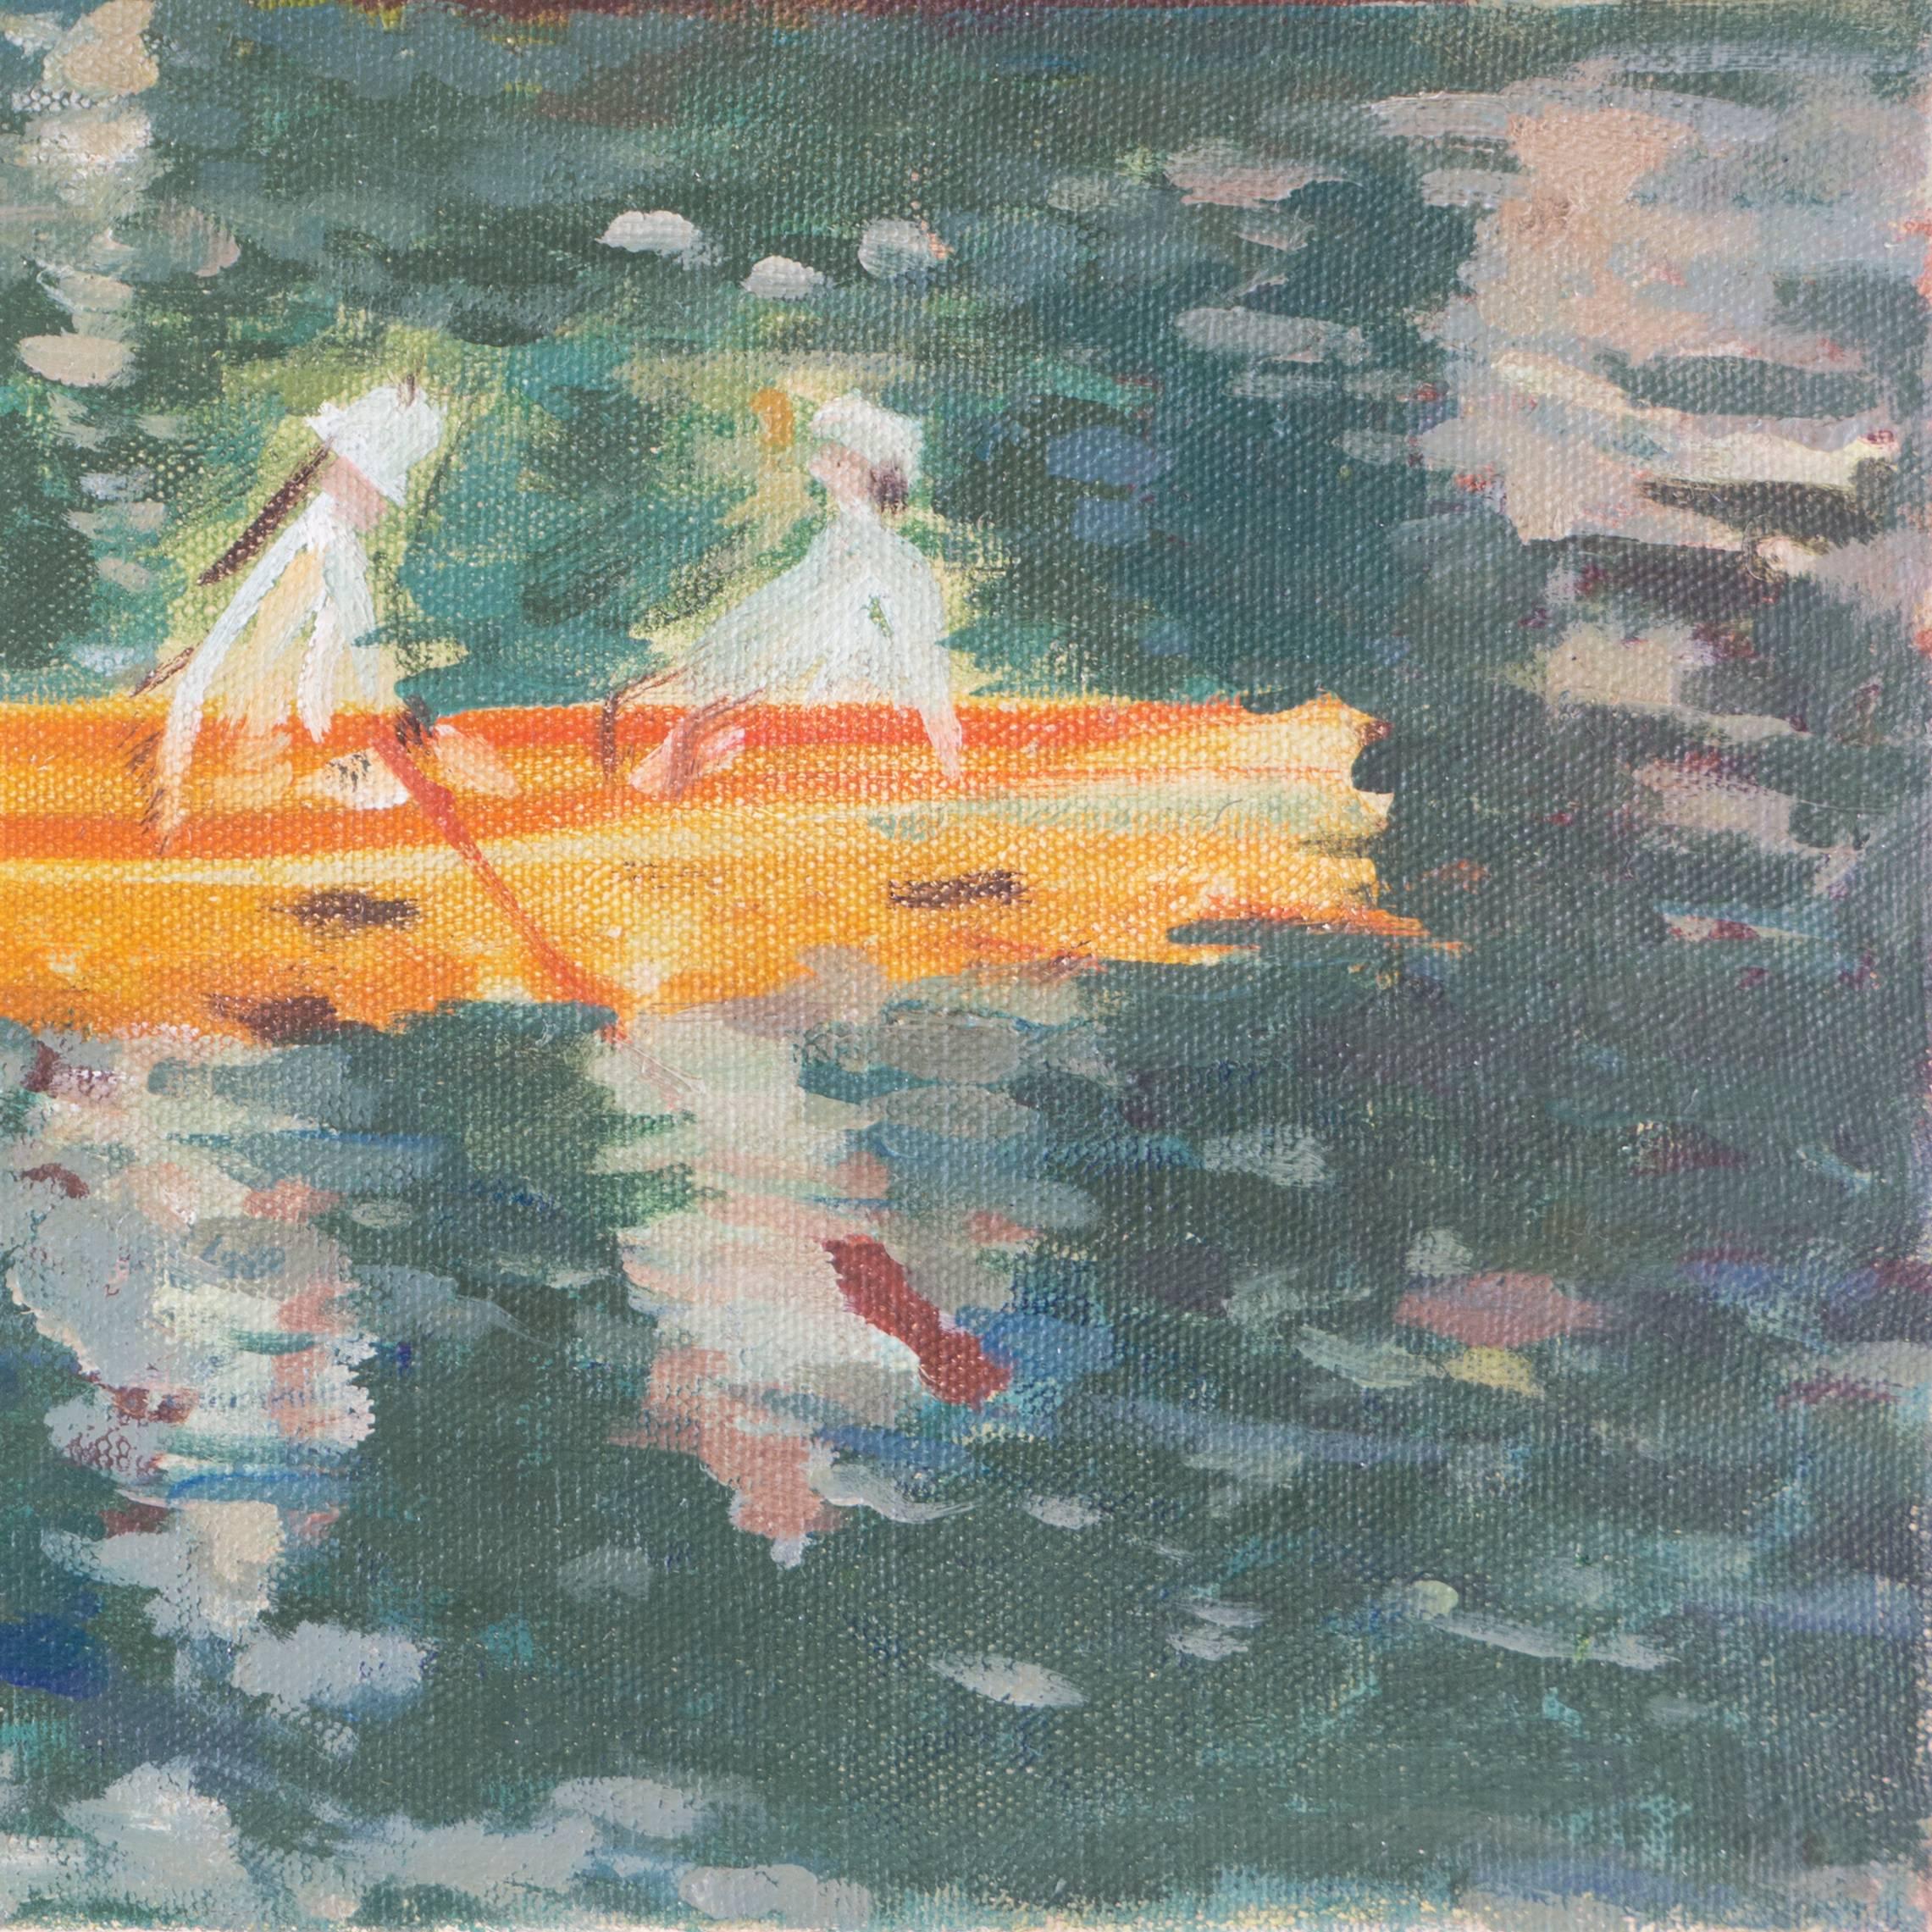 Unsigned and painted circa 1935

An impressionist oil painting of two young women enjoying boating on a lake side.
 
Displayed in a substantial gilt frame. 
Dimensions including frame: 17.5 x 20.5 x 3